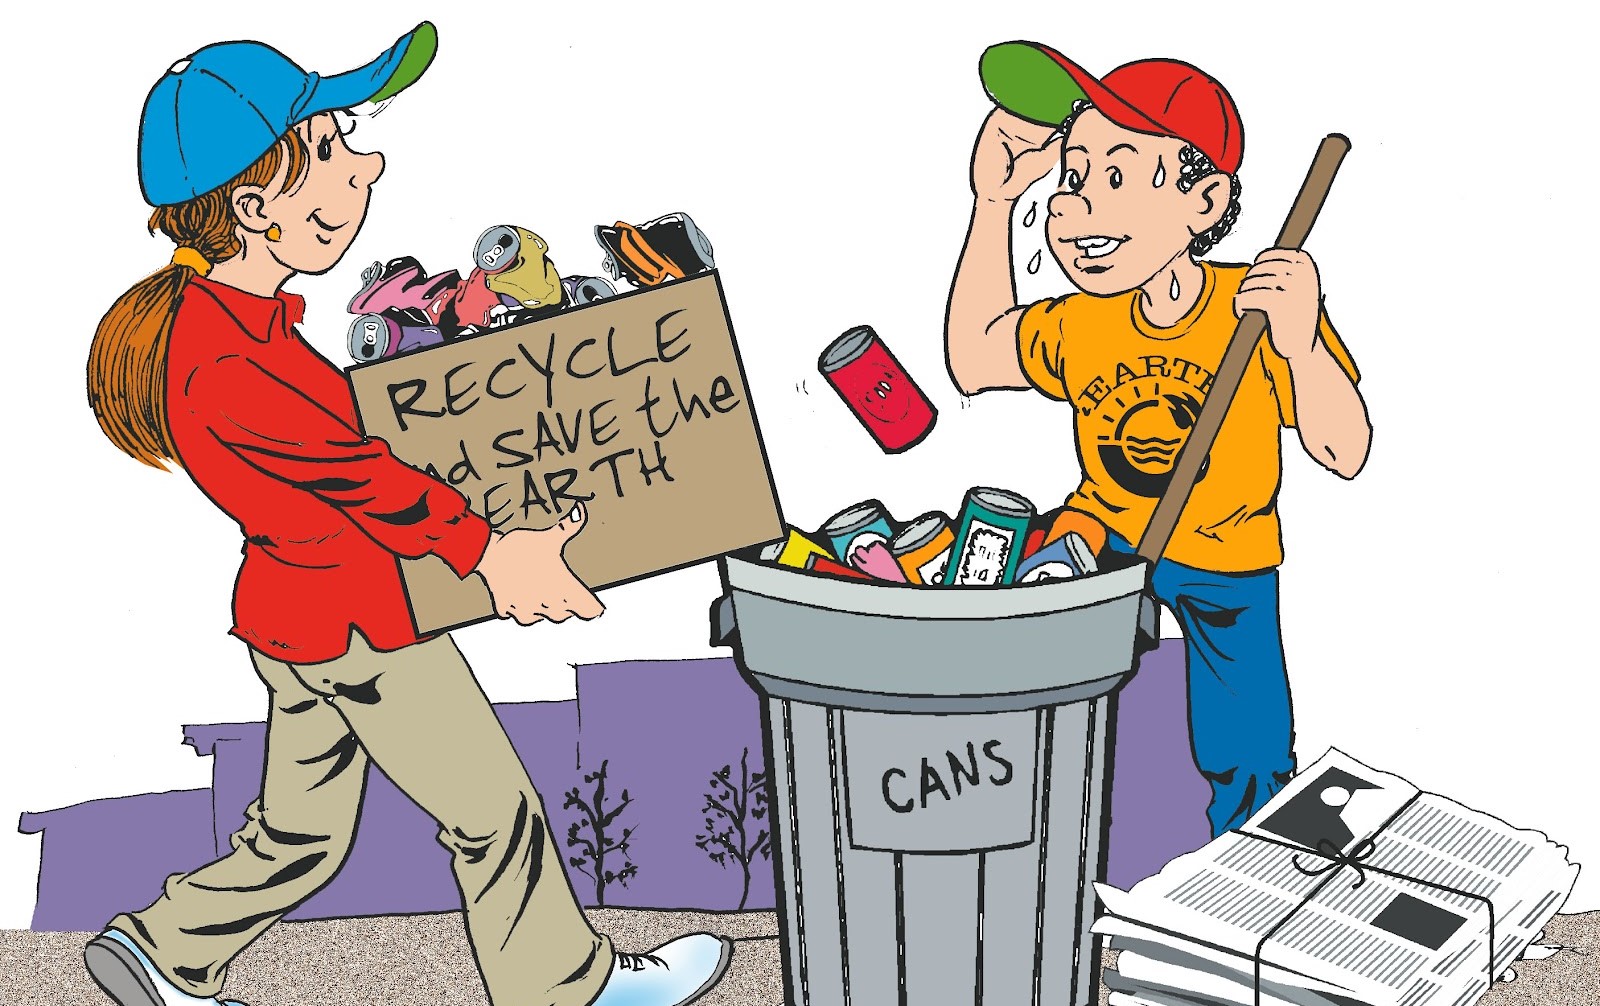 write an assignment on waste generation and management